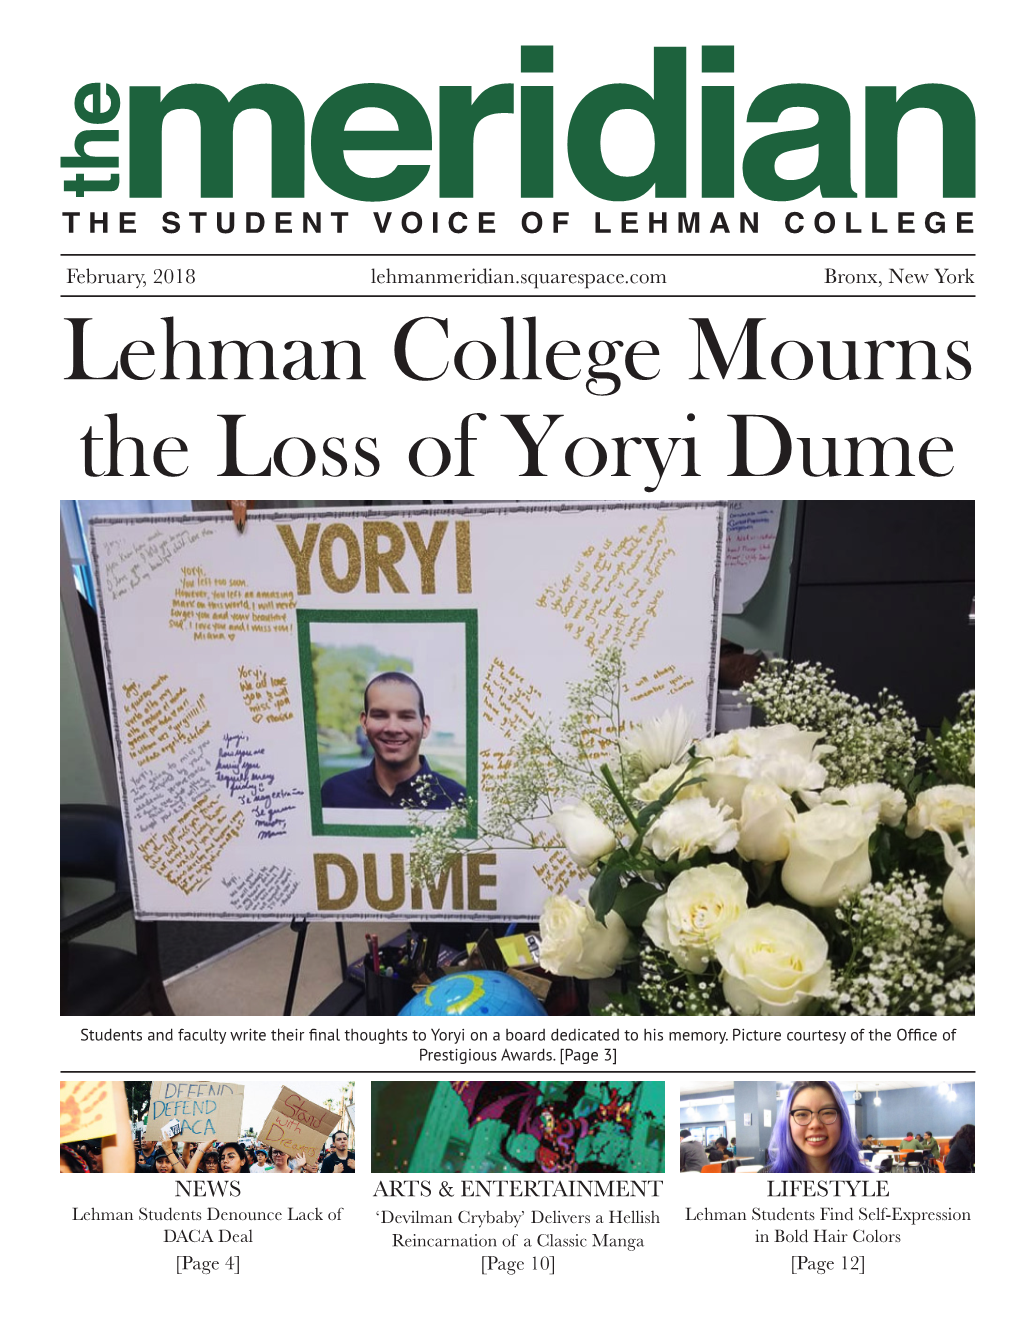 Lehman College Mourns the Loss of Yoryi Dume